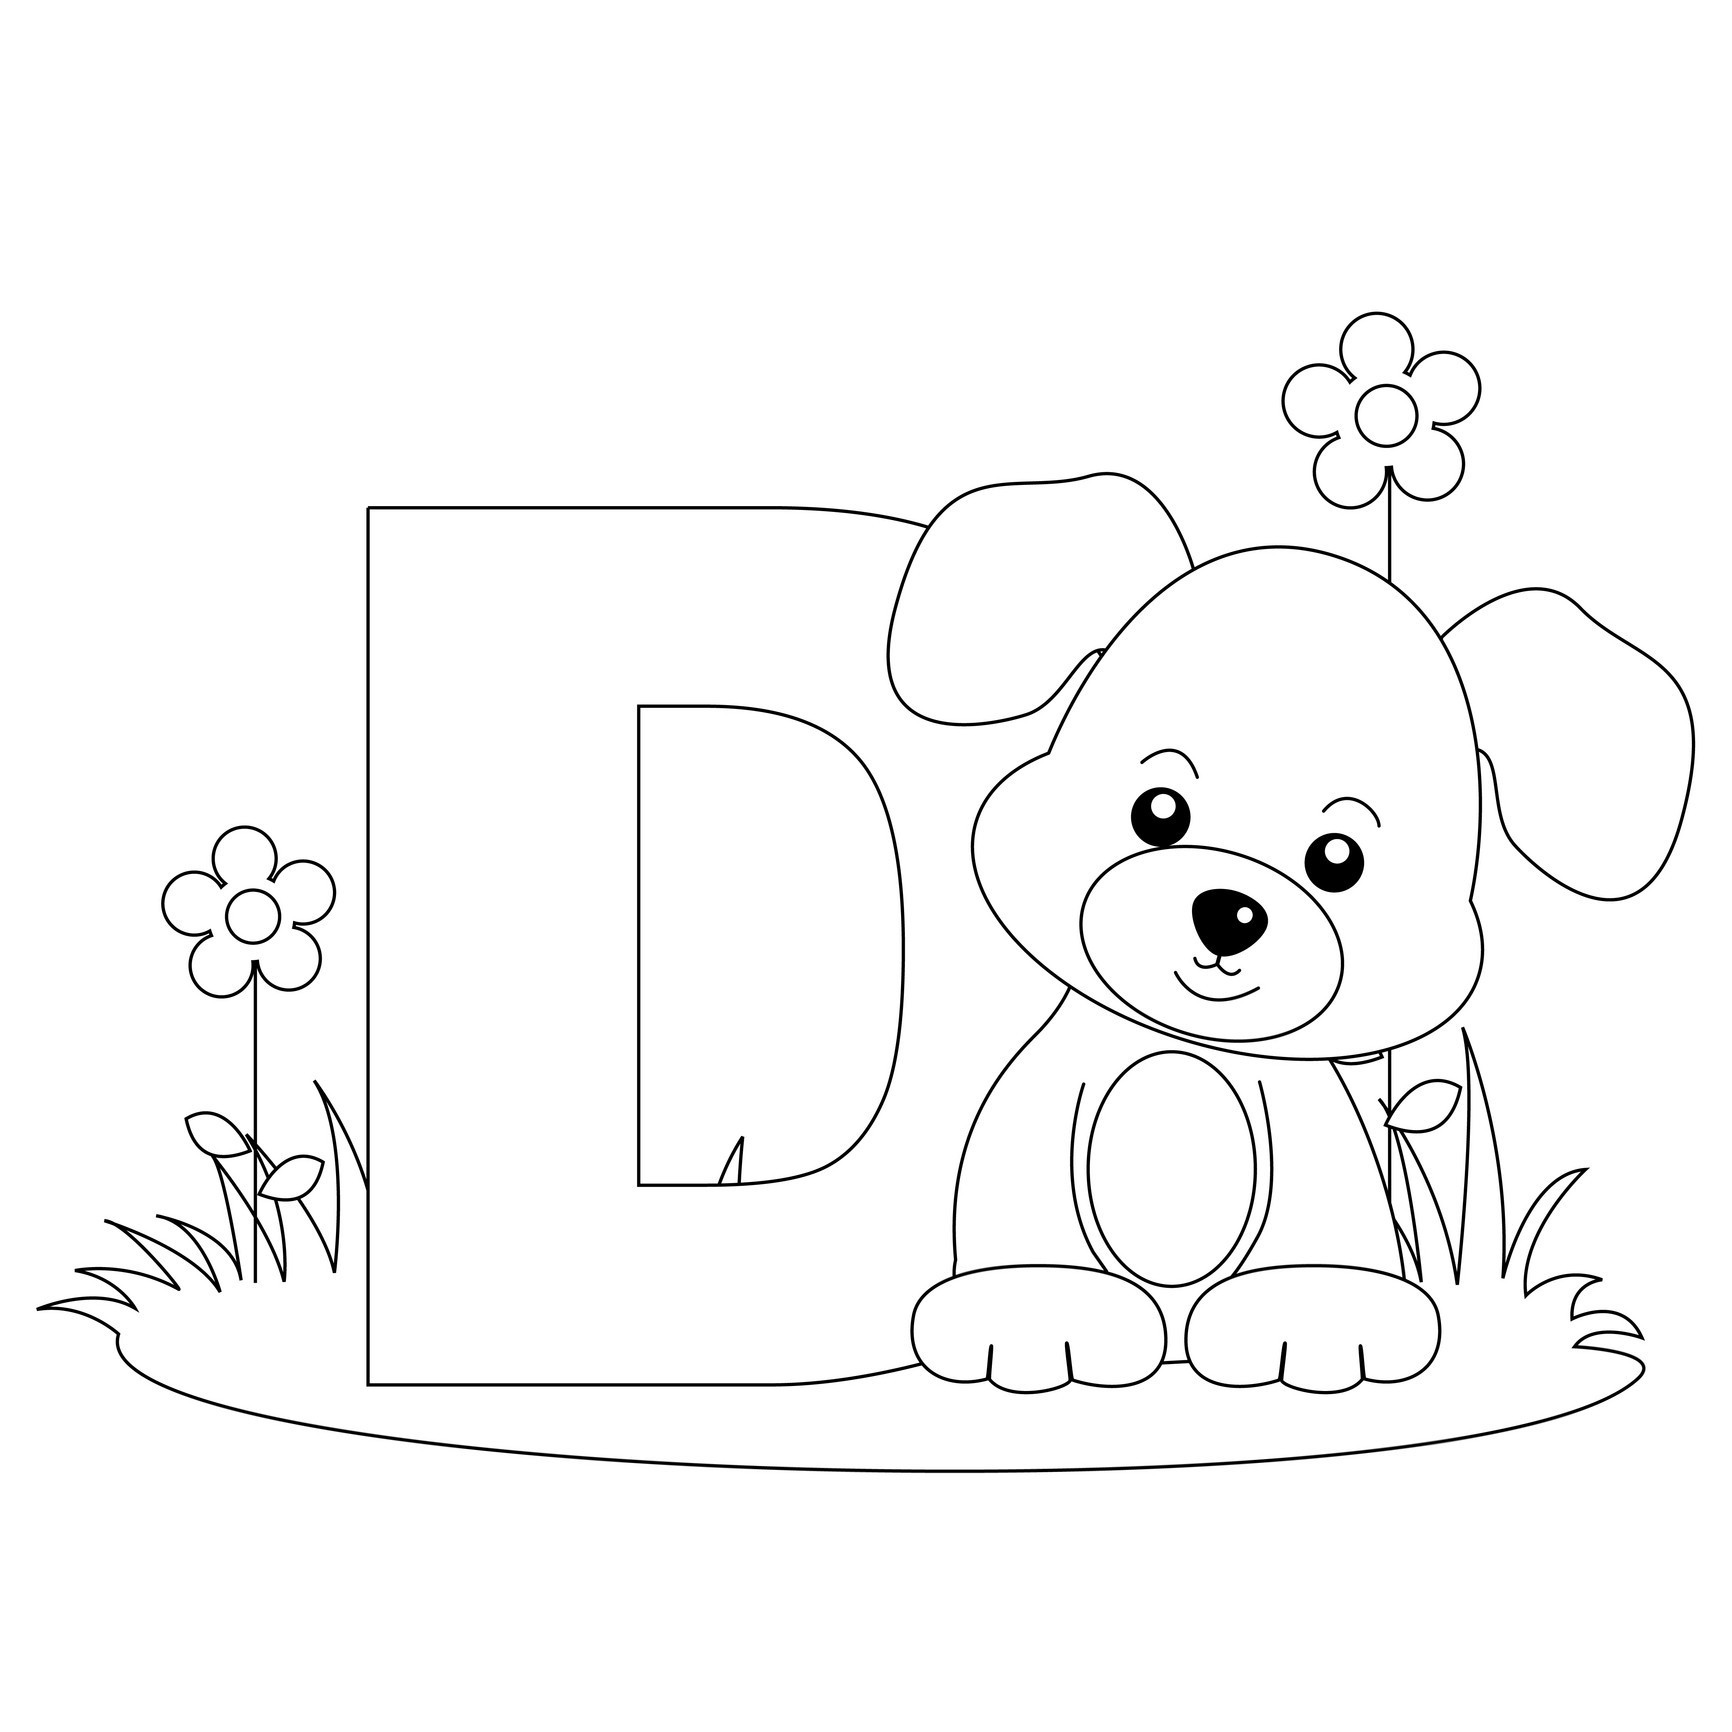 Coloring Pages For Toddlers Letters
 Free Printable Alphabet Coloring Pages for Kids Best